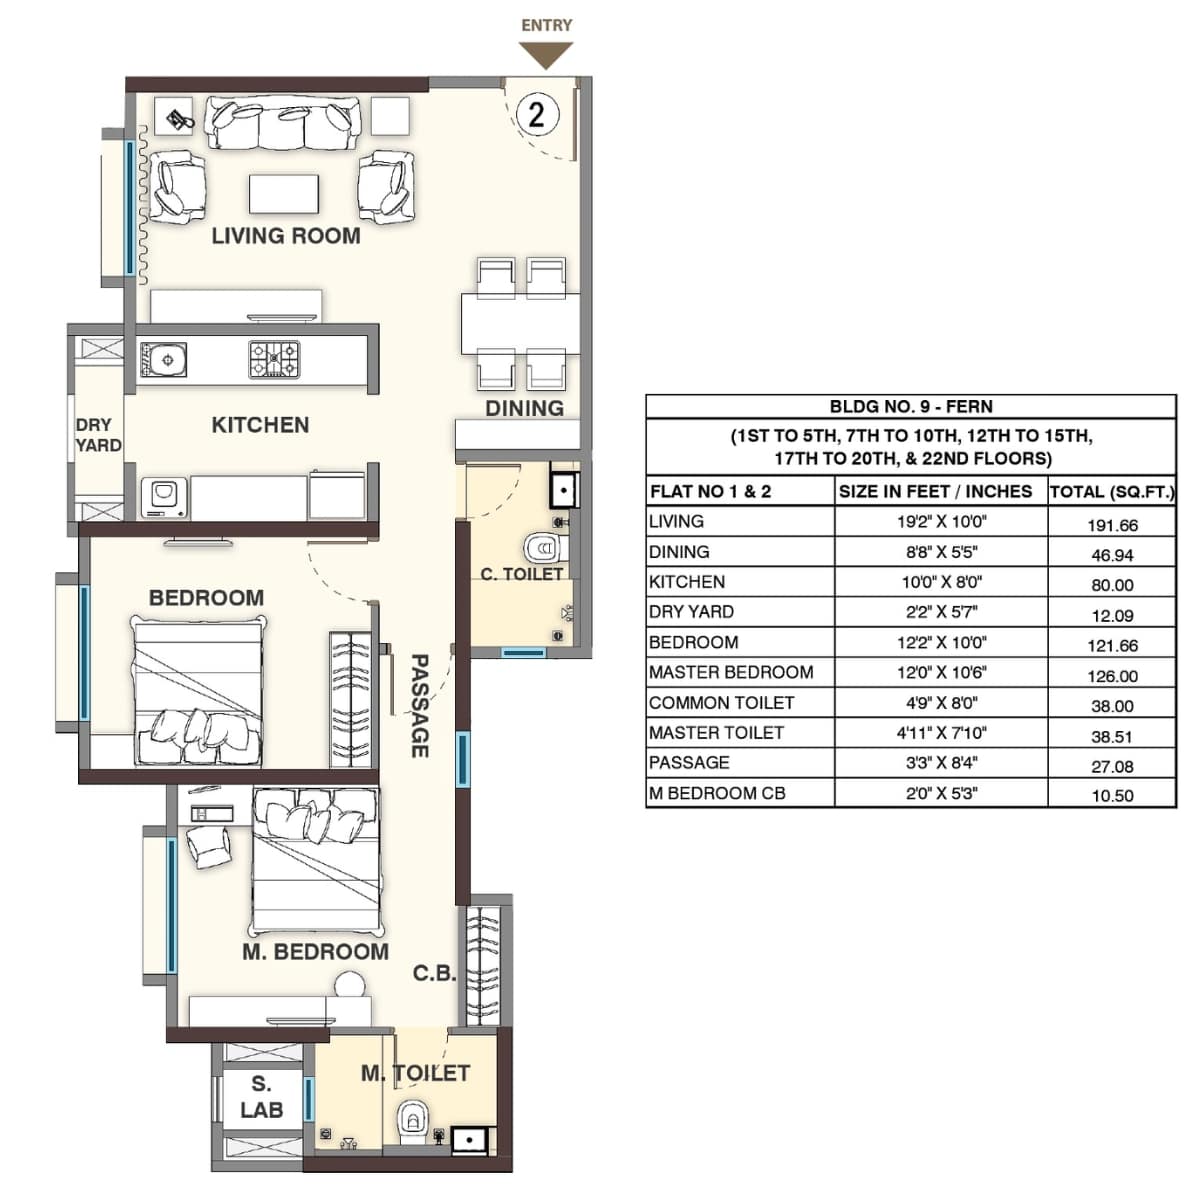 Sheth-Vasant-Lawns-Floor-Plan-Fern-2-BHK-Unit-2-1st-to-5th-7th-to-10th-12th-to-15th-17th-to-22nd